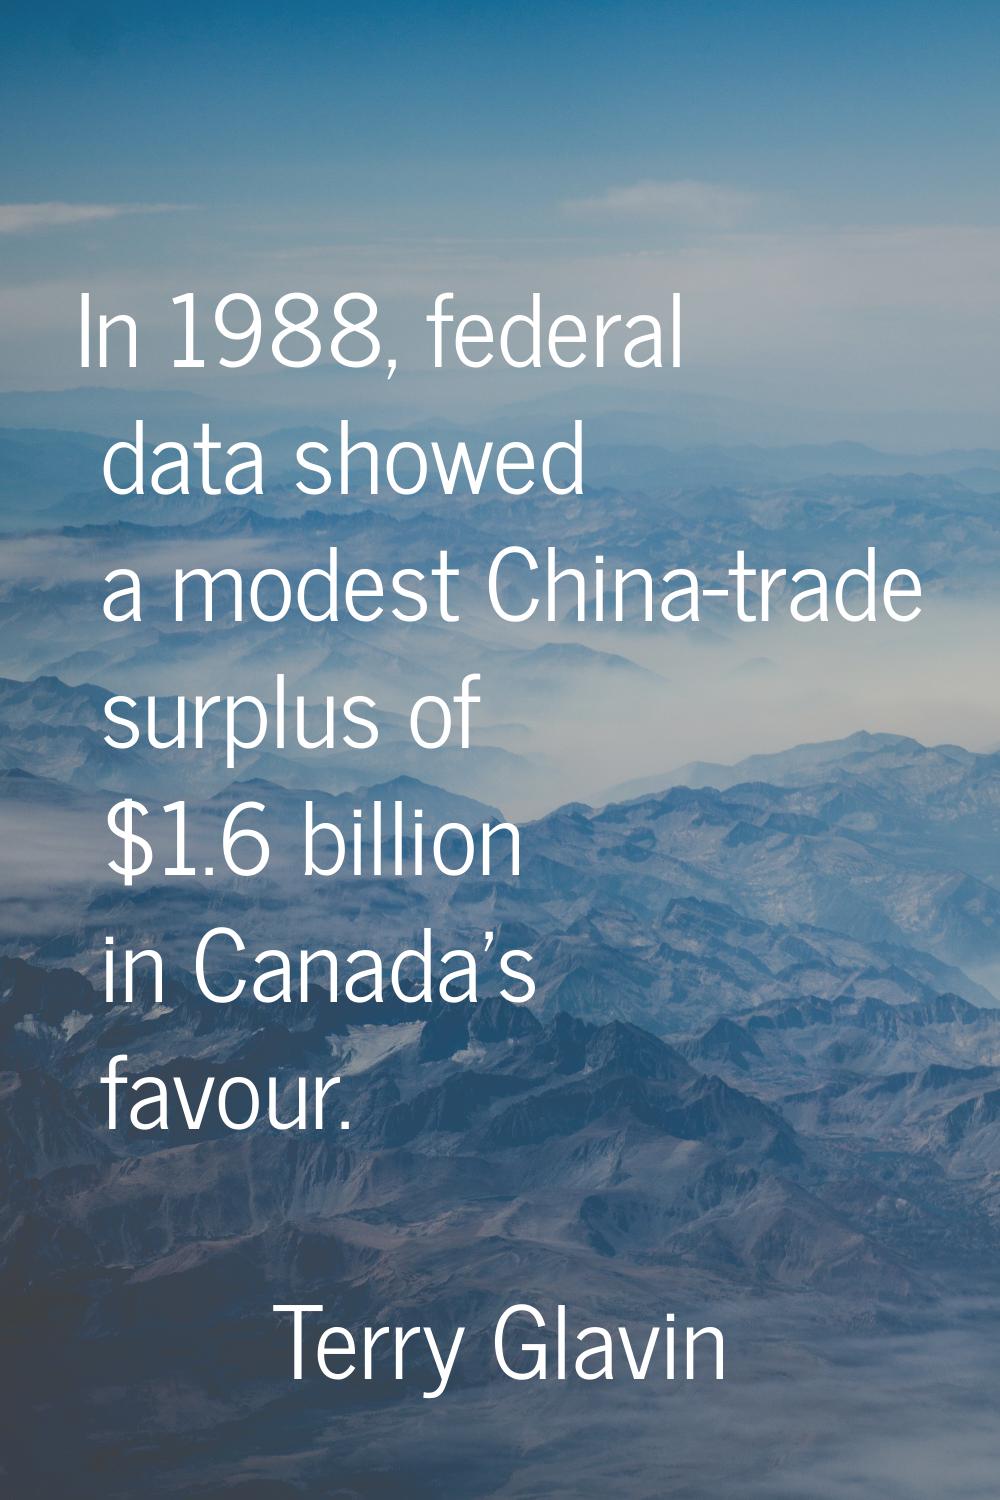 In 1988, federal data showed a modest China-trade surplus of $1.6 billion in Canada's favour.